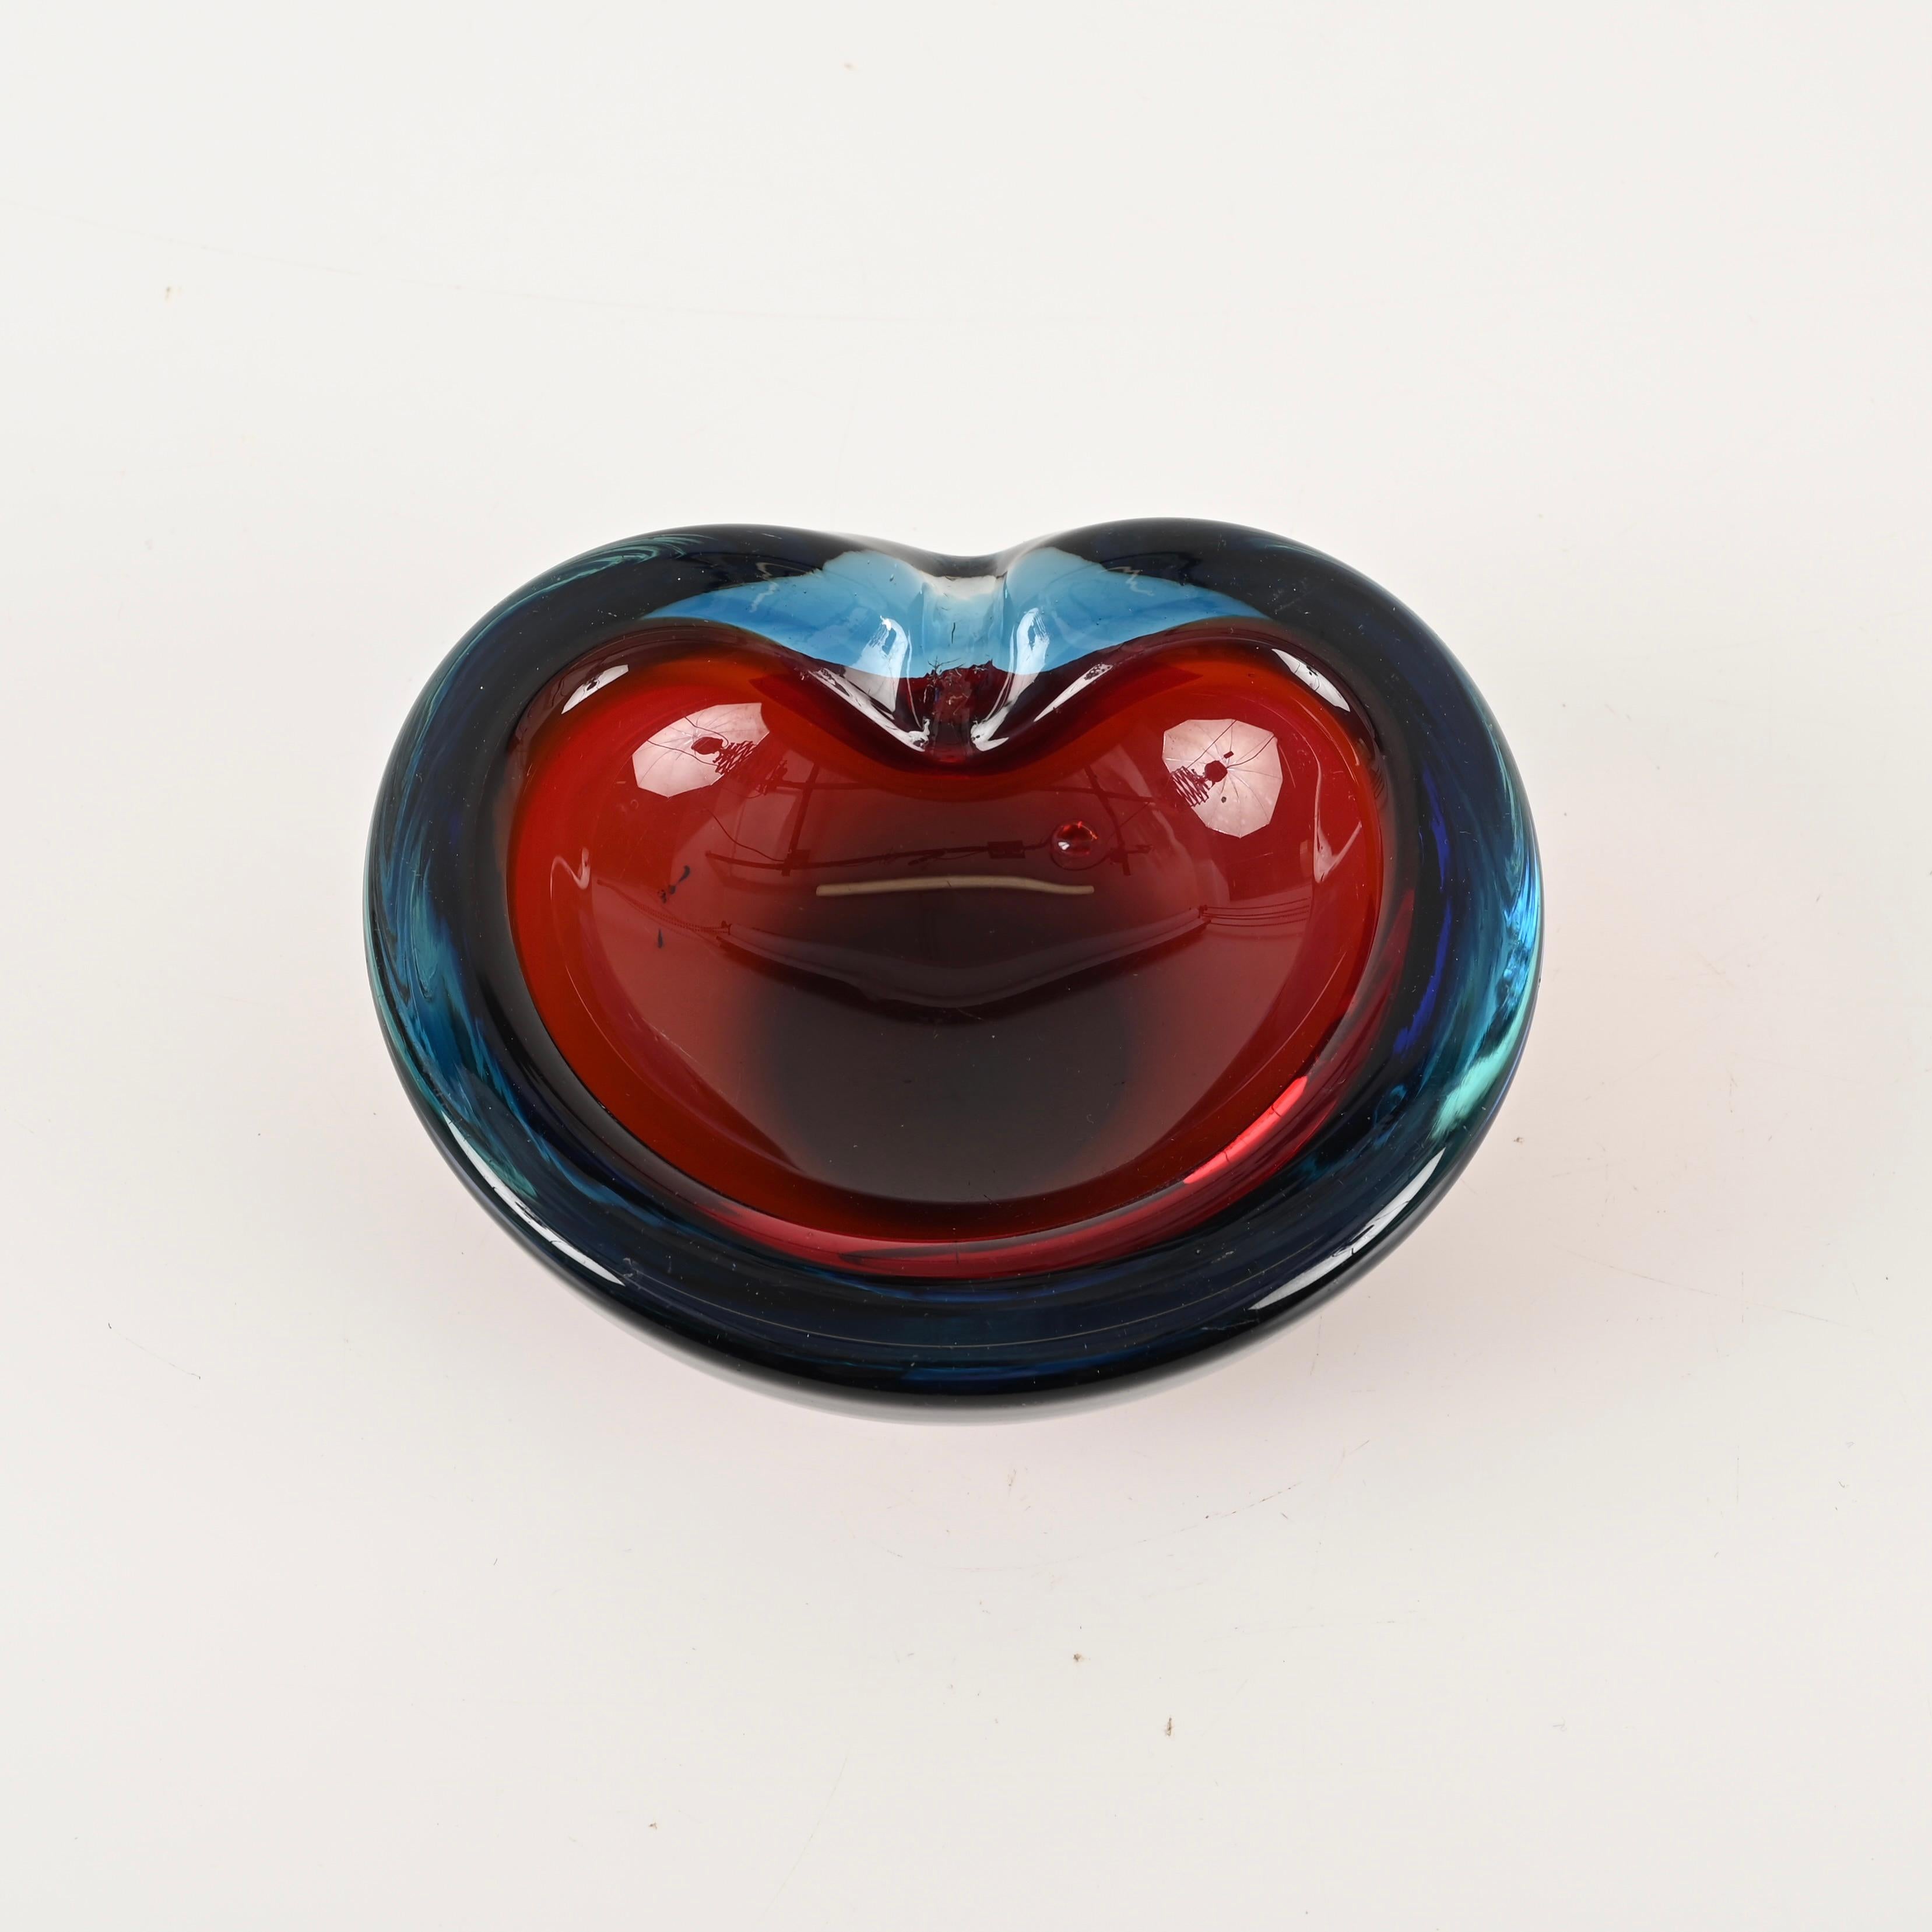 Blue and Red Sommerso Murano Glass Heart-Shaped Bowl, Italy, 1960s For Sale 4